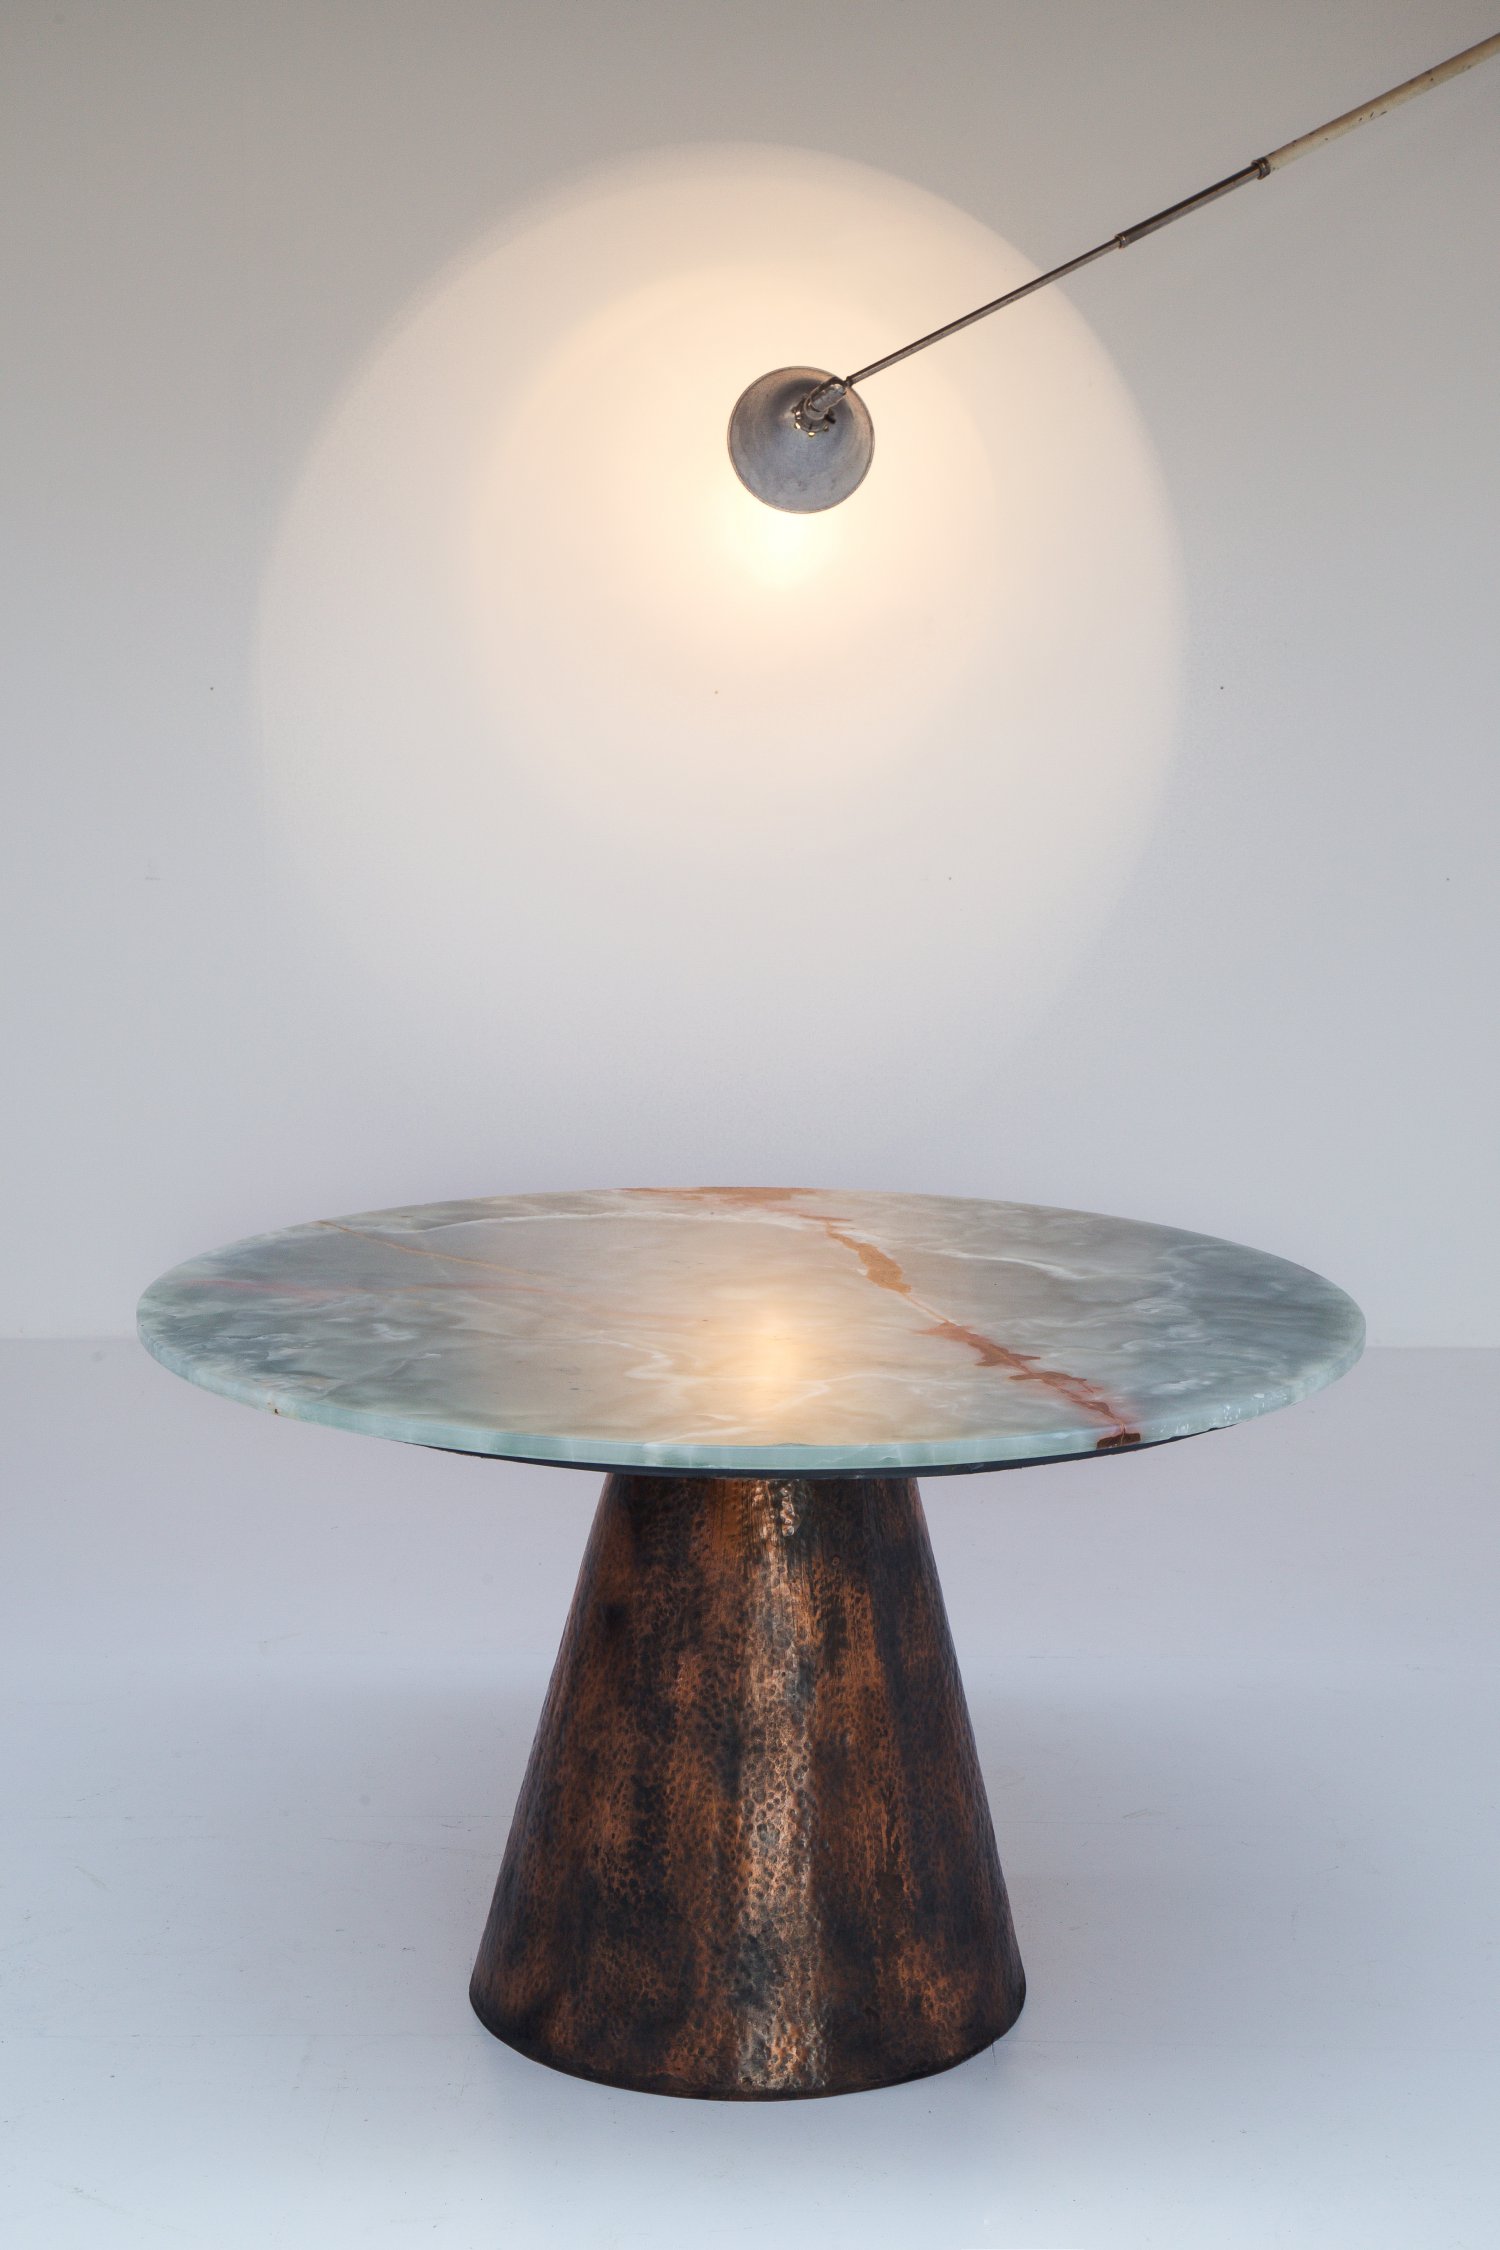 Copper and onyx dining table.